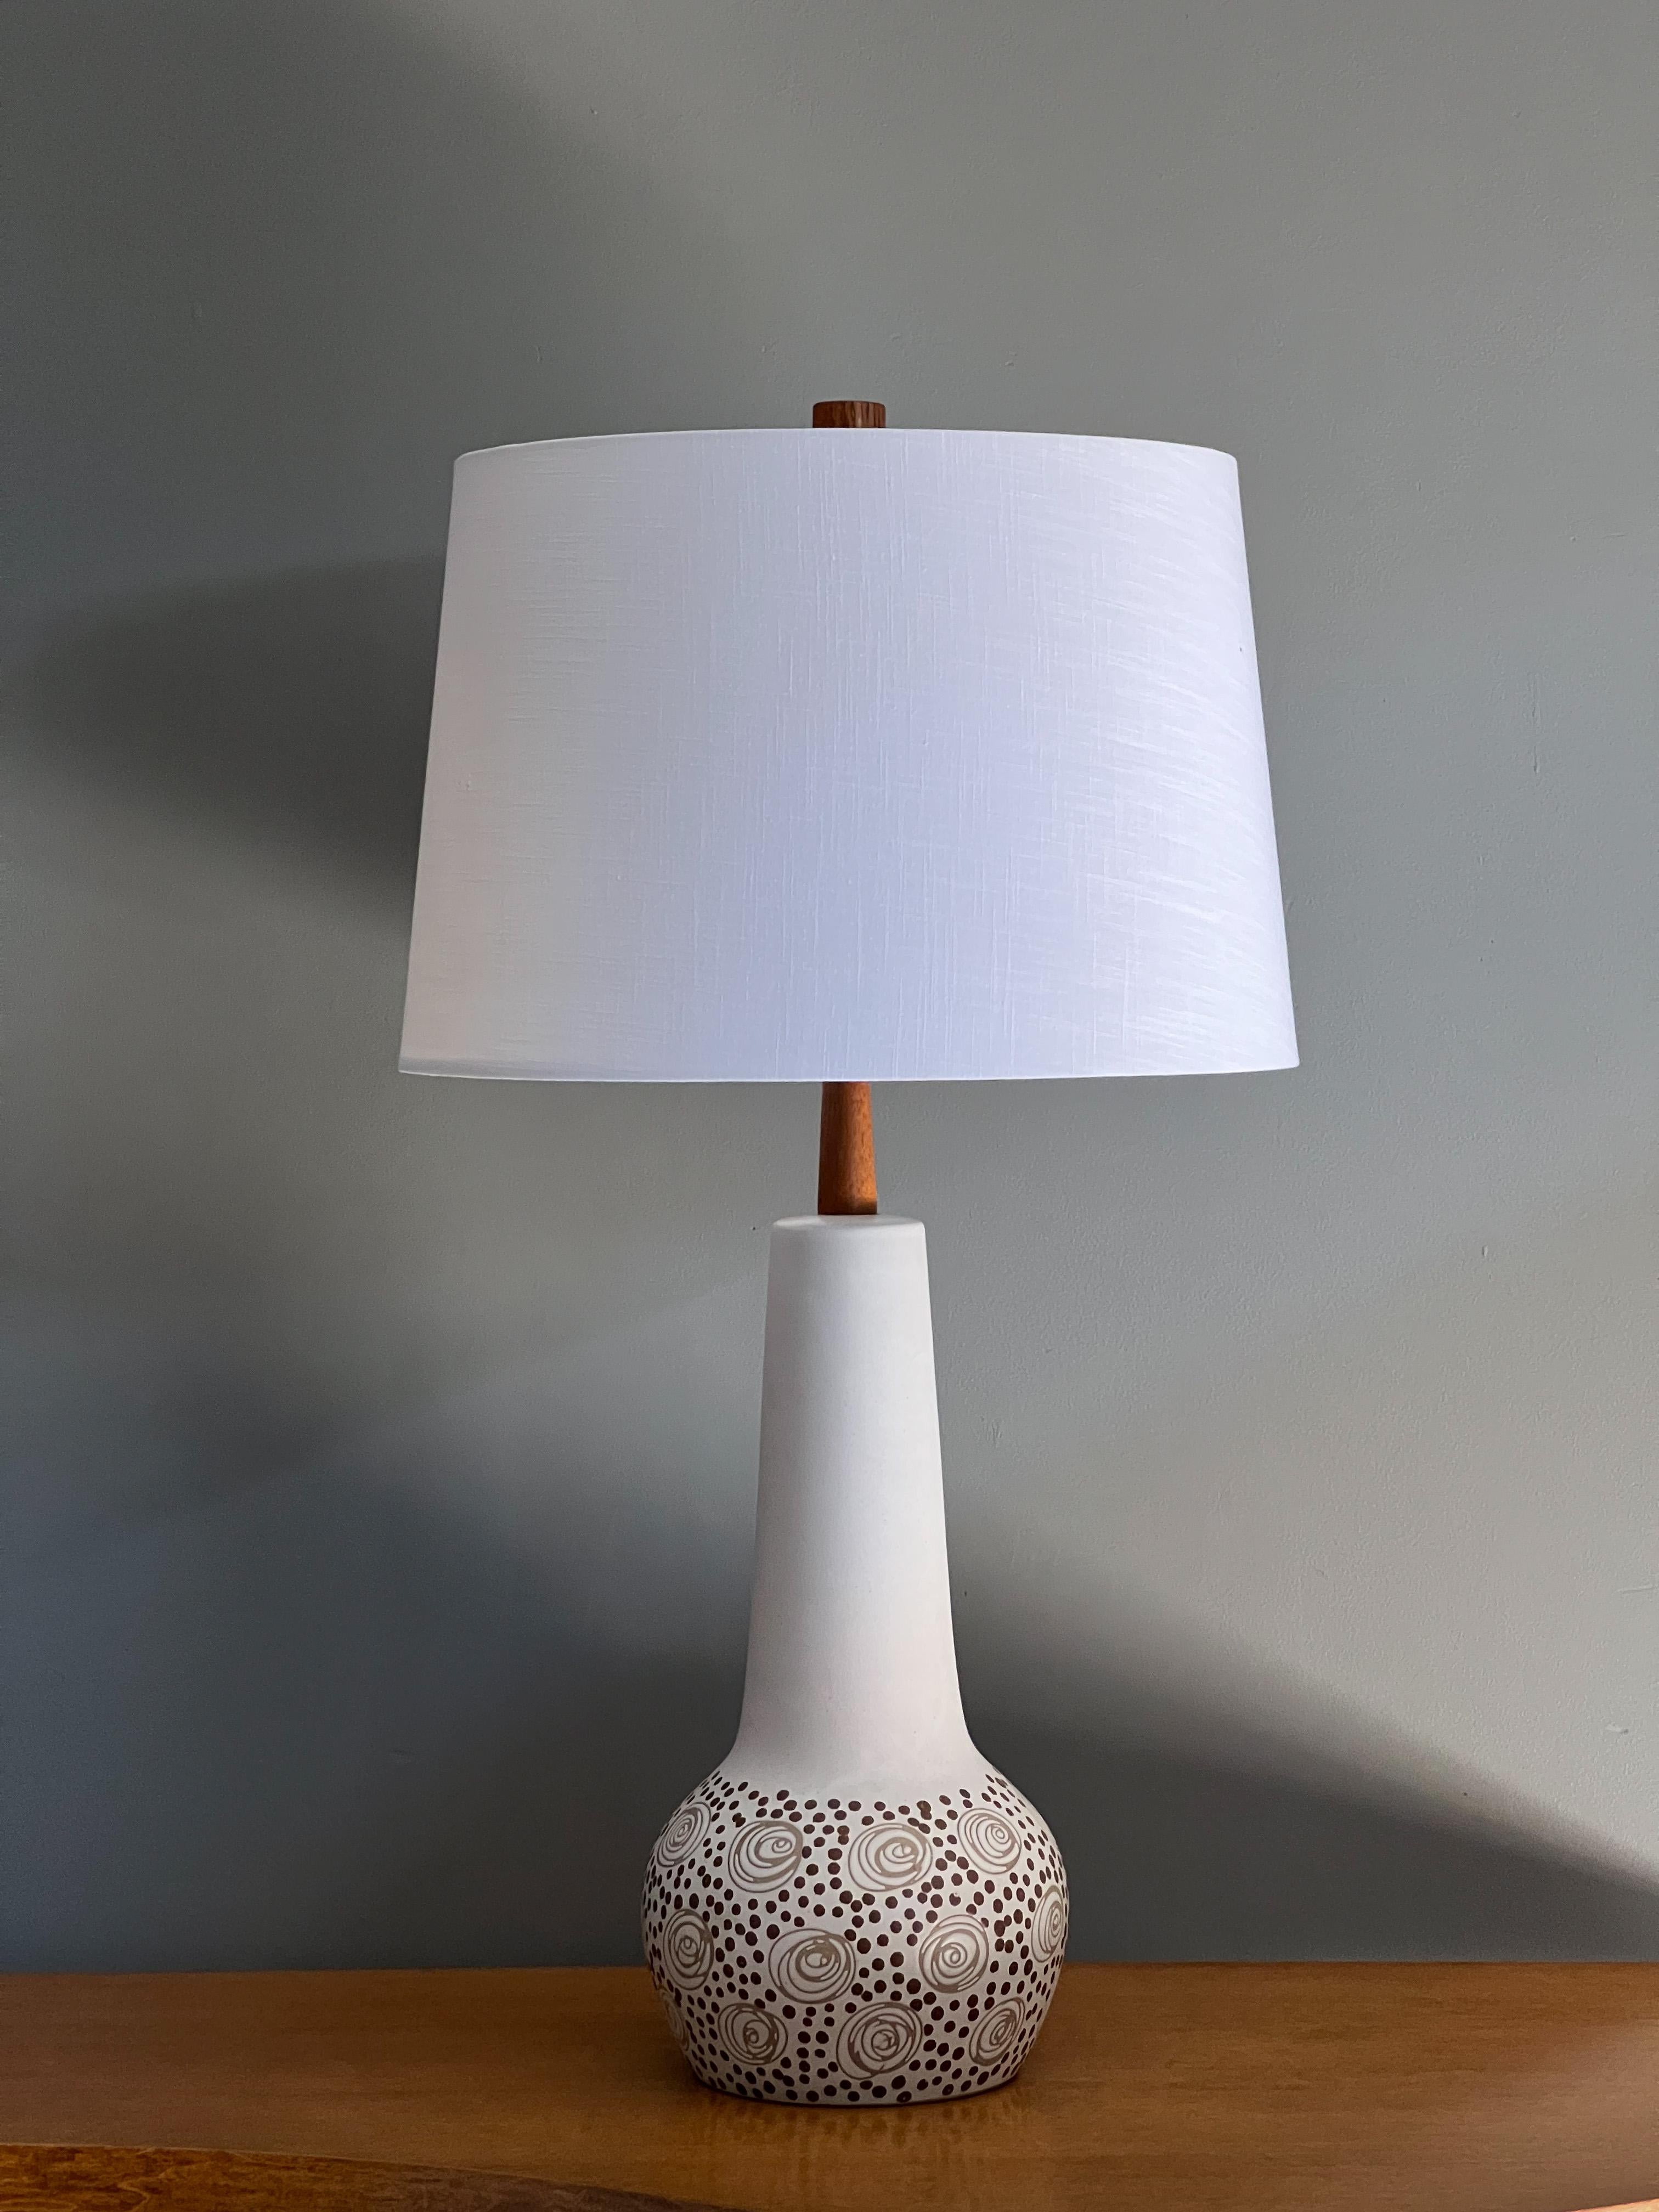 Gordon and Jane Martz Marshall Studios Ceramic Lamp In Good Condition For Sale In Round Rock, TX